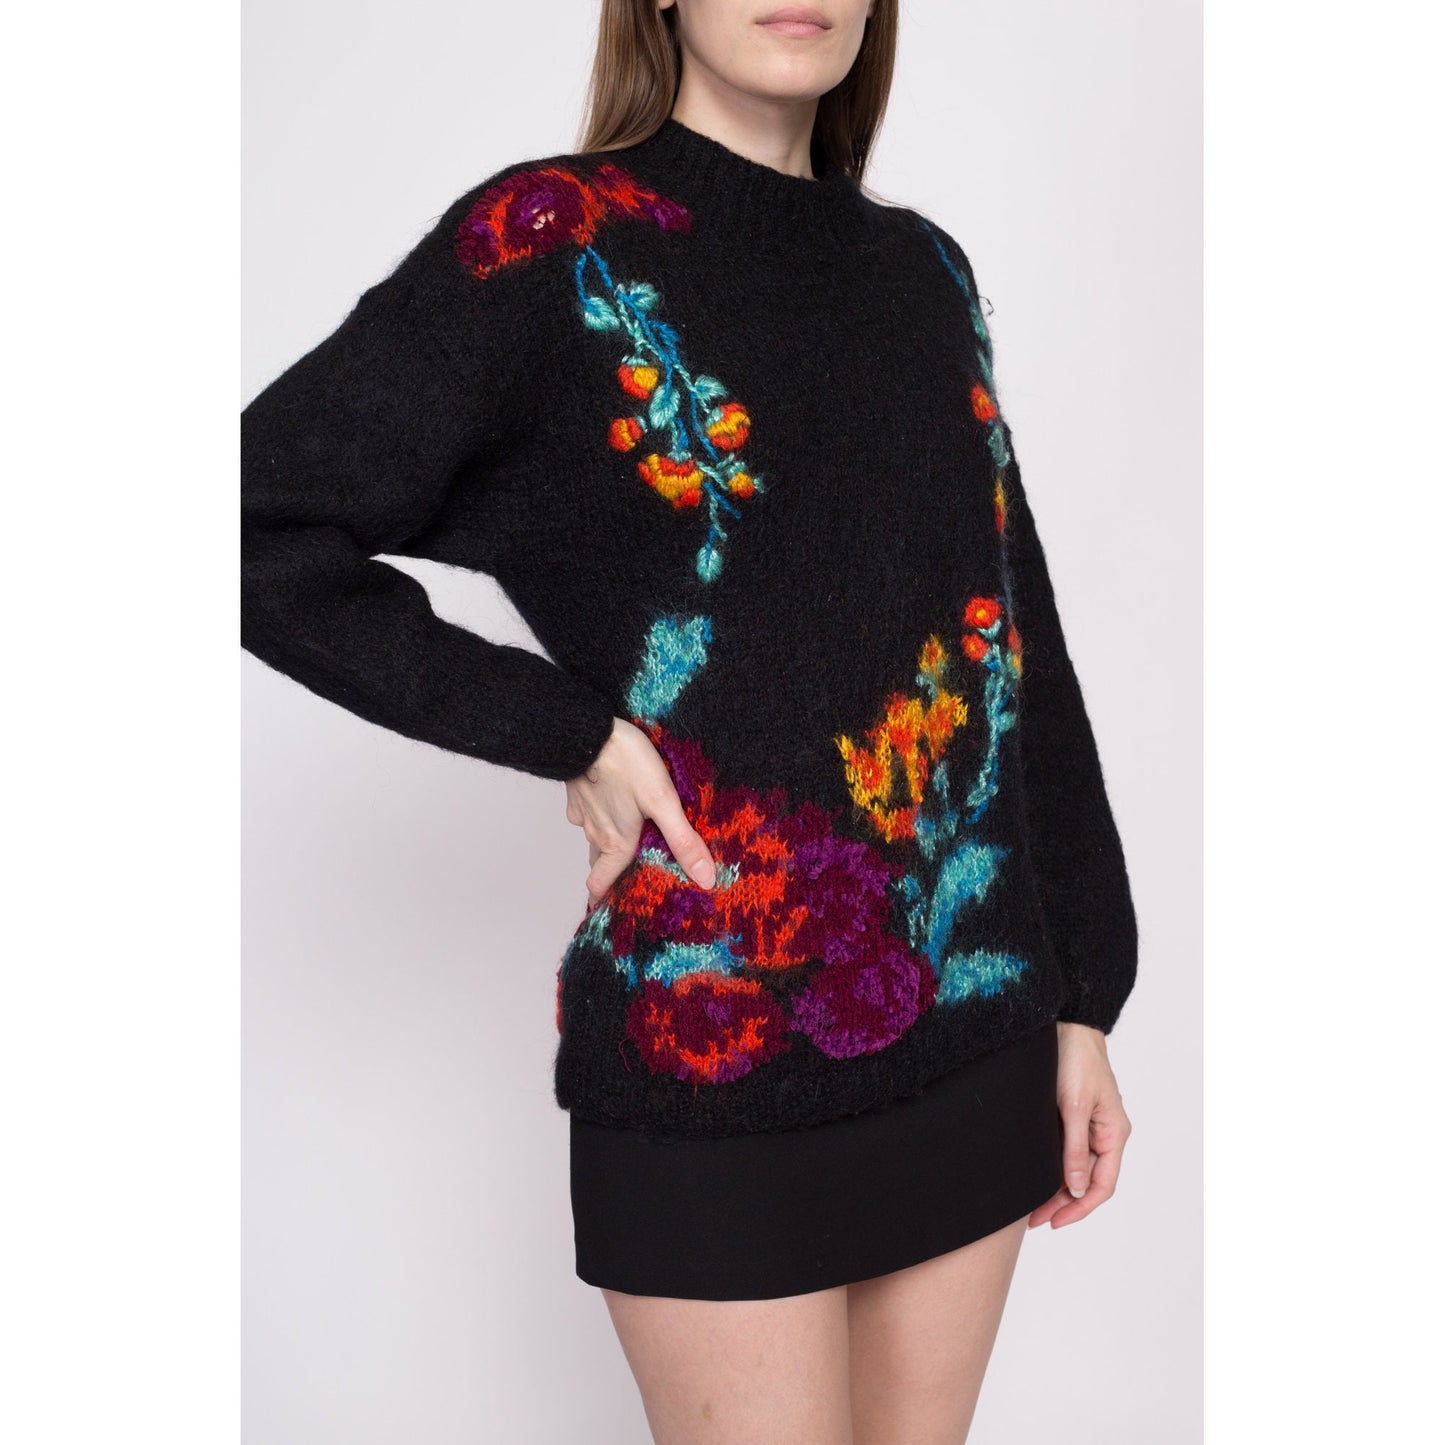 80s Black Embroidered Floral Sweater - Medium | Vintage Wool Mohair Knit Funnel Neck Pullover Jumper